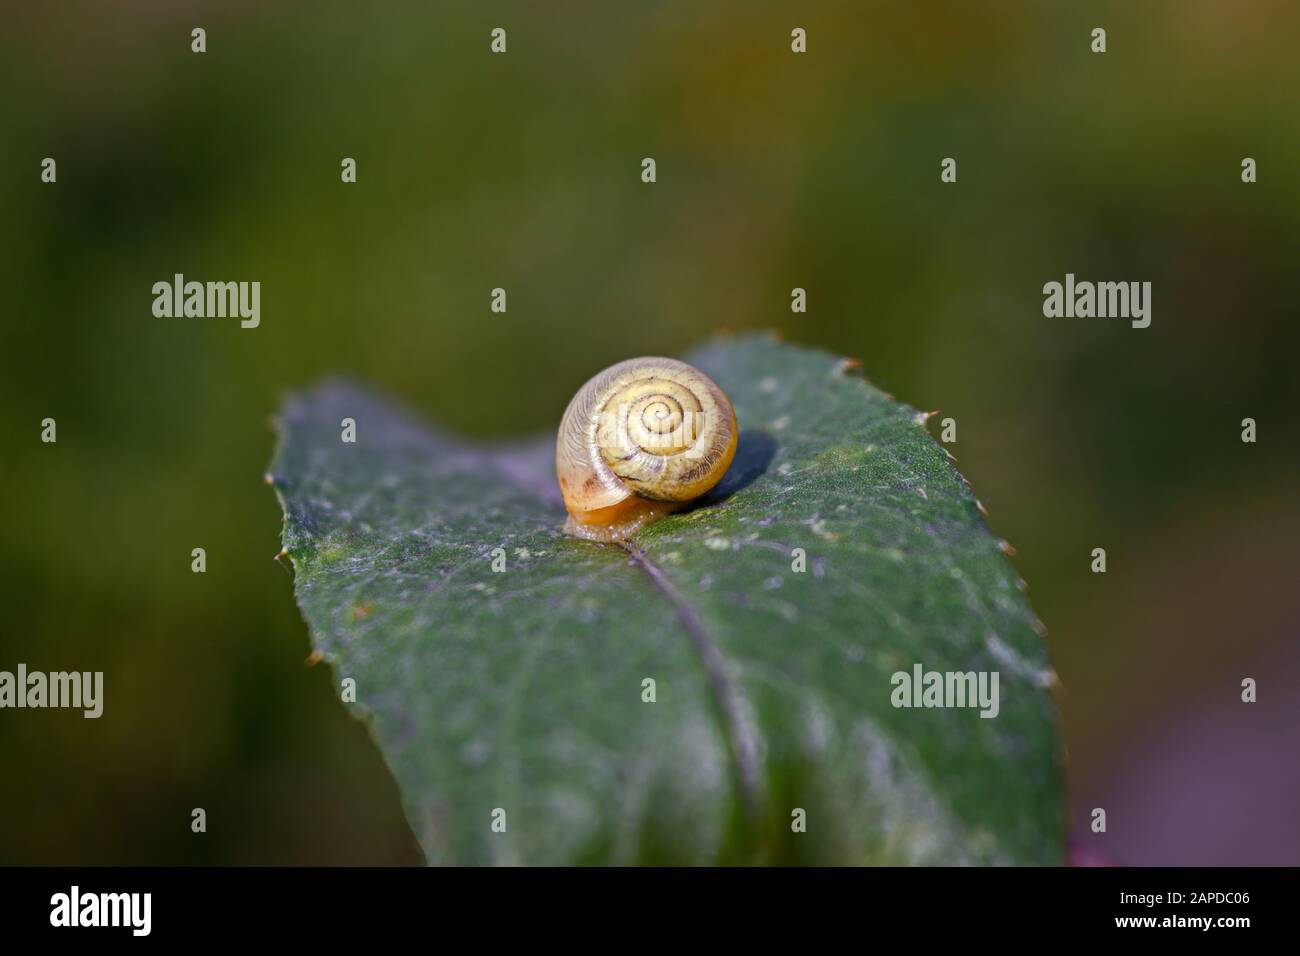 Little snail on wet green leaf. Snail on a green leaf close-up summer floral background. Stock Photo